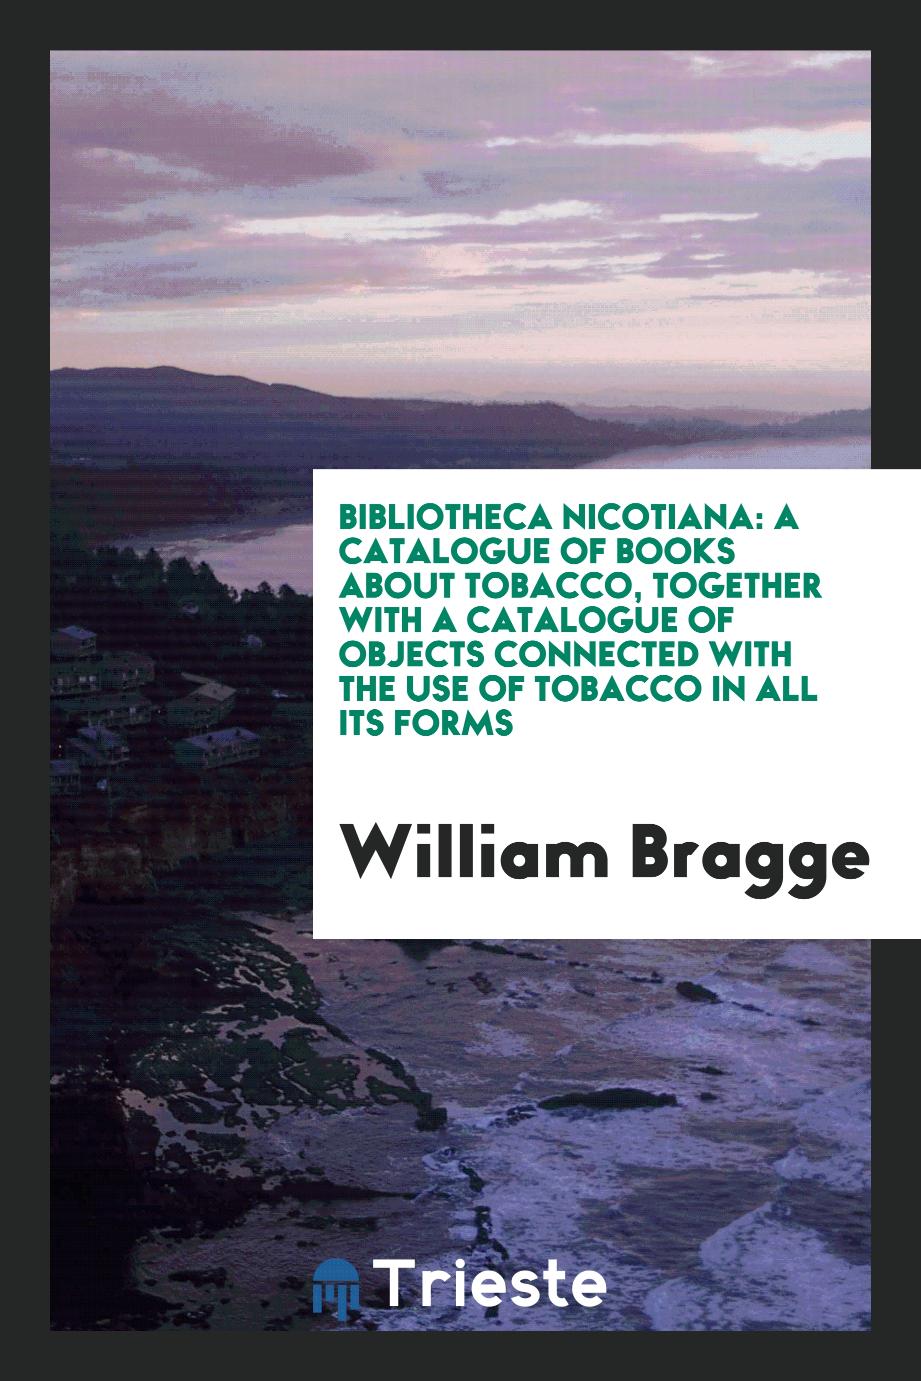 Bibliotheca nicotiana: a catalogue of books about tobacco, together with a catalogue of objects connected with the use of tobacco in all its forms